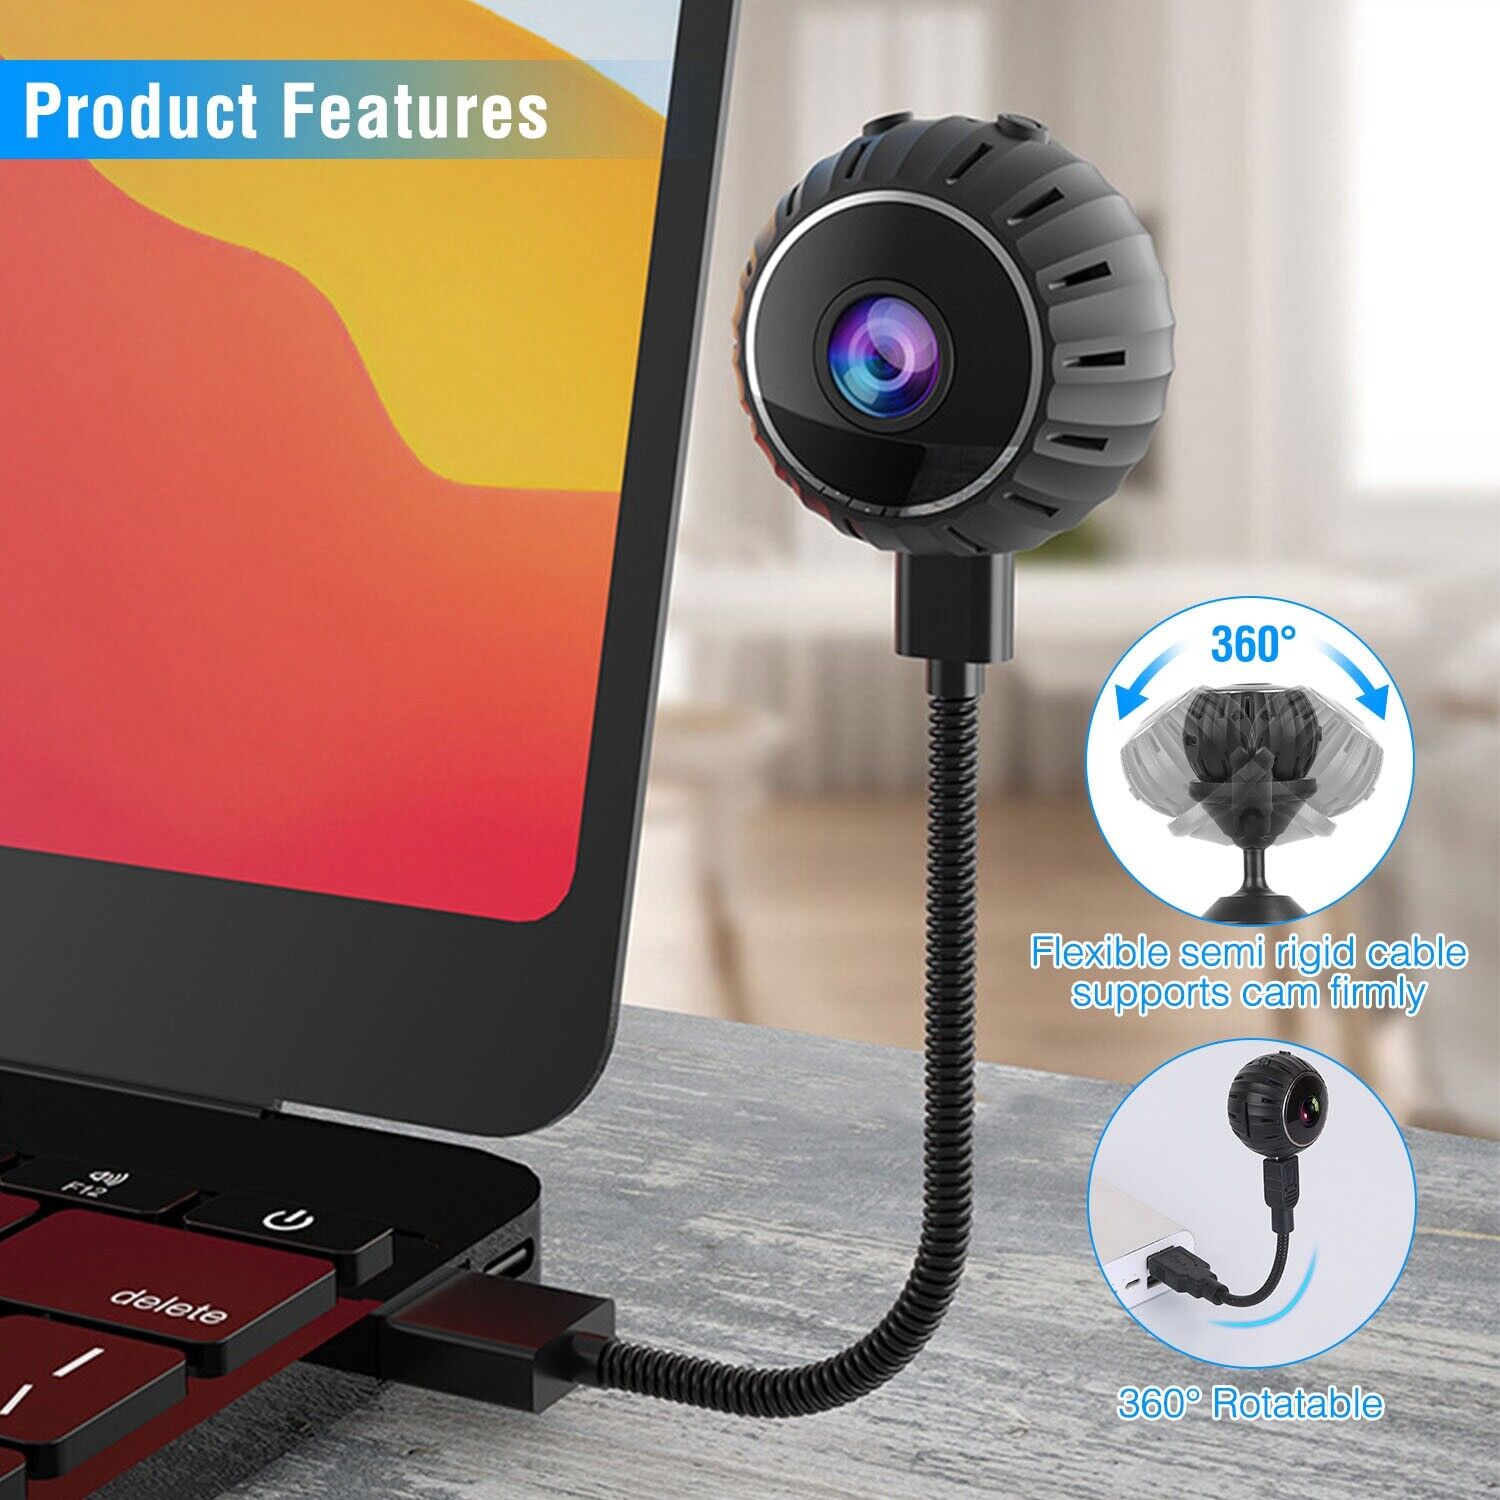 Security-Cameras-Mini-Camera-for-Home-Security-1080p-HD-Mini-IR-Camera-WiFi-Wireless-Small-Indoor-Nanny-Camera-Cell-Phone-APP-Control-with-A-Wide-Angle-Remote-View-24